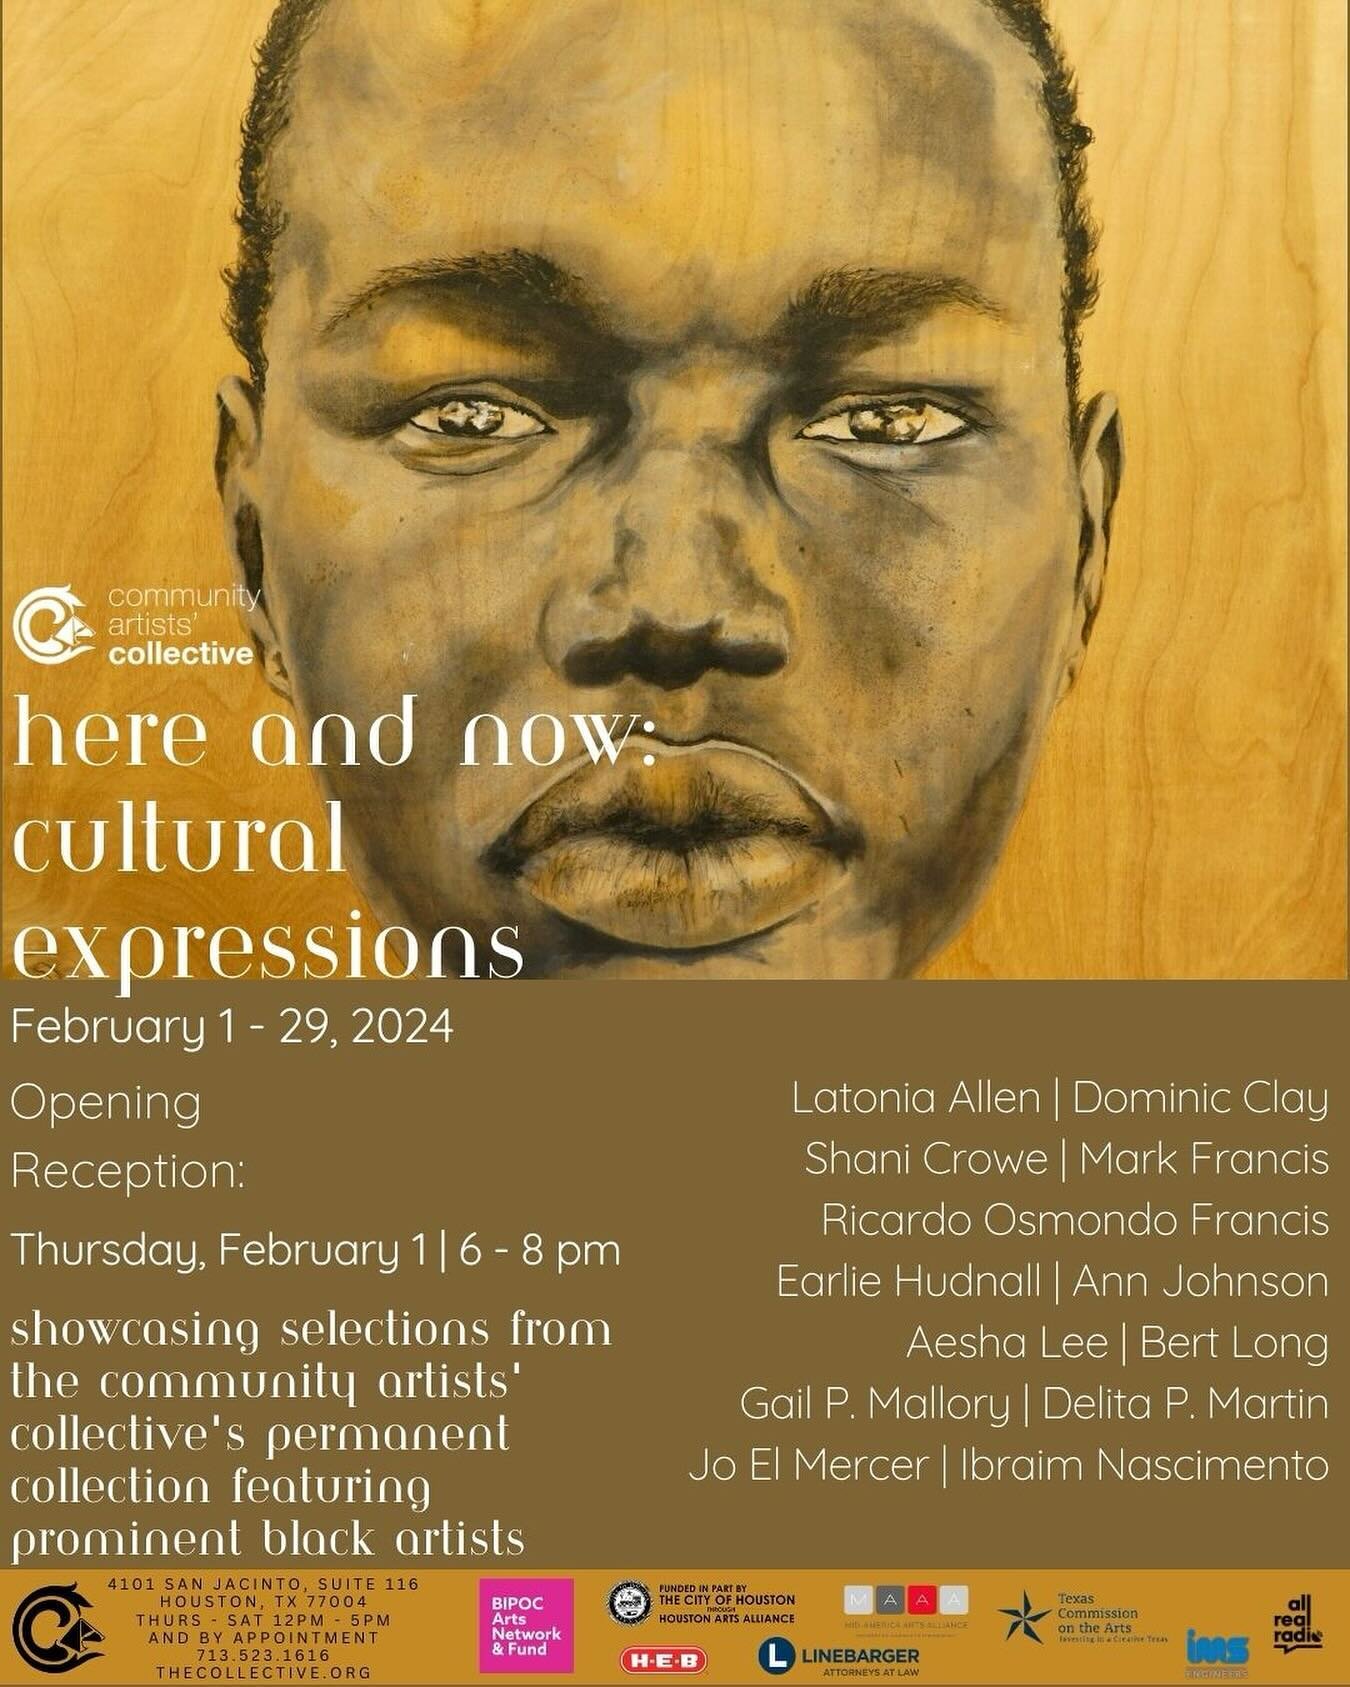 Join us next week for the opening of &ldquo;Here and Now: Cultural Expressions,&rdquo; an exhibition celebrating Black History Month!

Thursday, February 1
6 PM - 8 PM
Community Artists&rsquo; Collective
4101 San Jacinto at Cleburne, Suite 116.

This